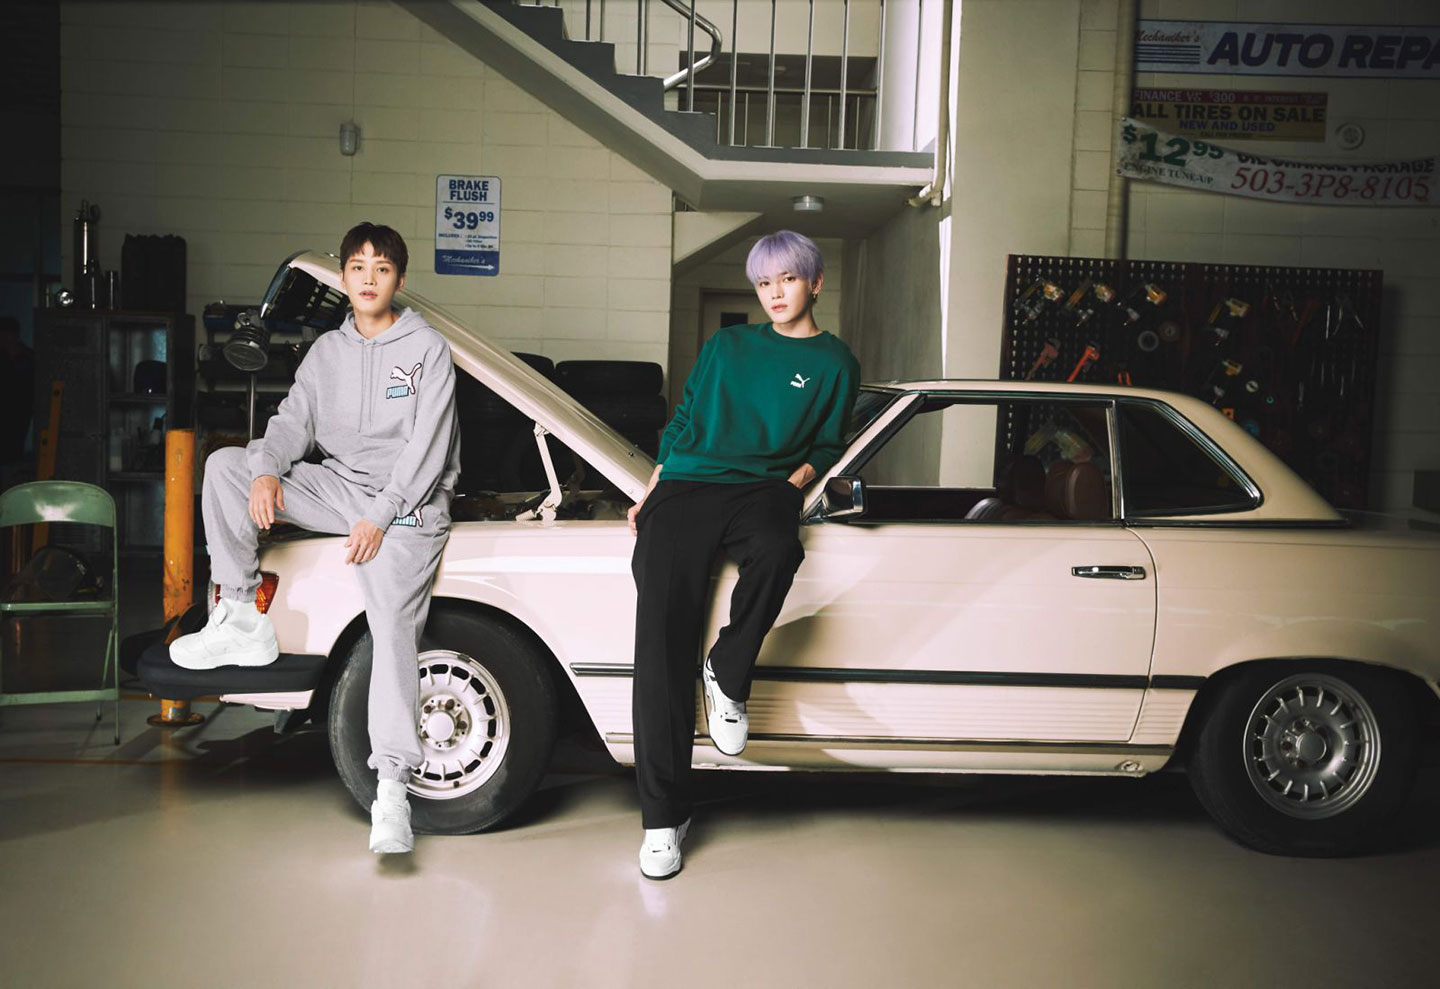 Campaign Spotlight: Puma reinvents the iconic Slipstream from the '80s with  ambassadors NCT 127 - adobo Magazine Online